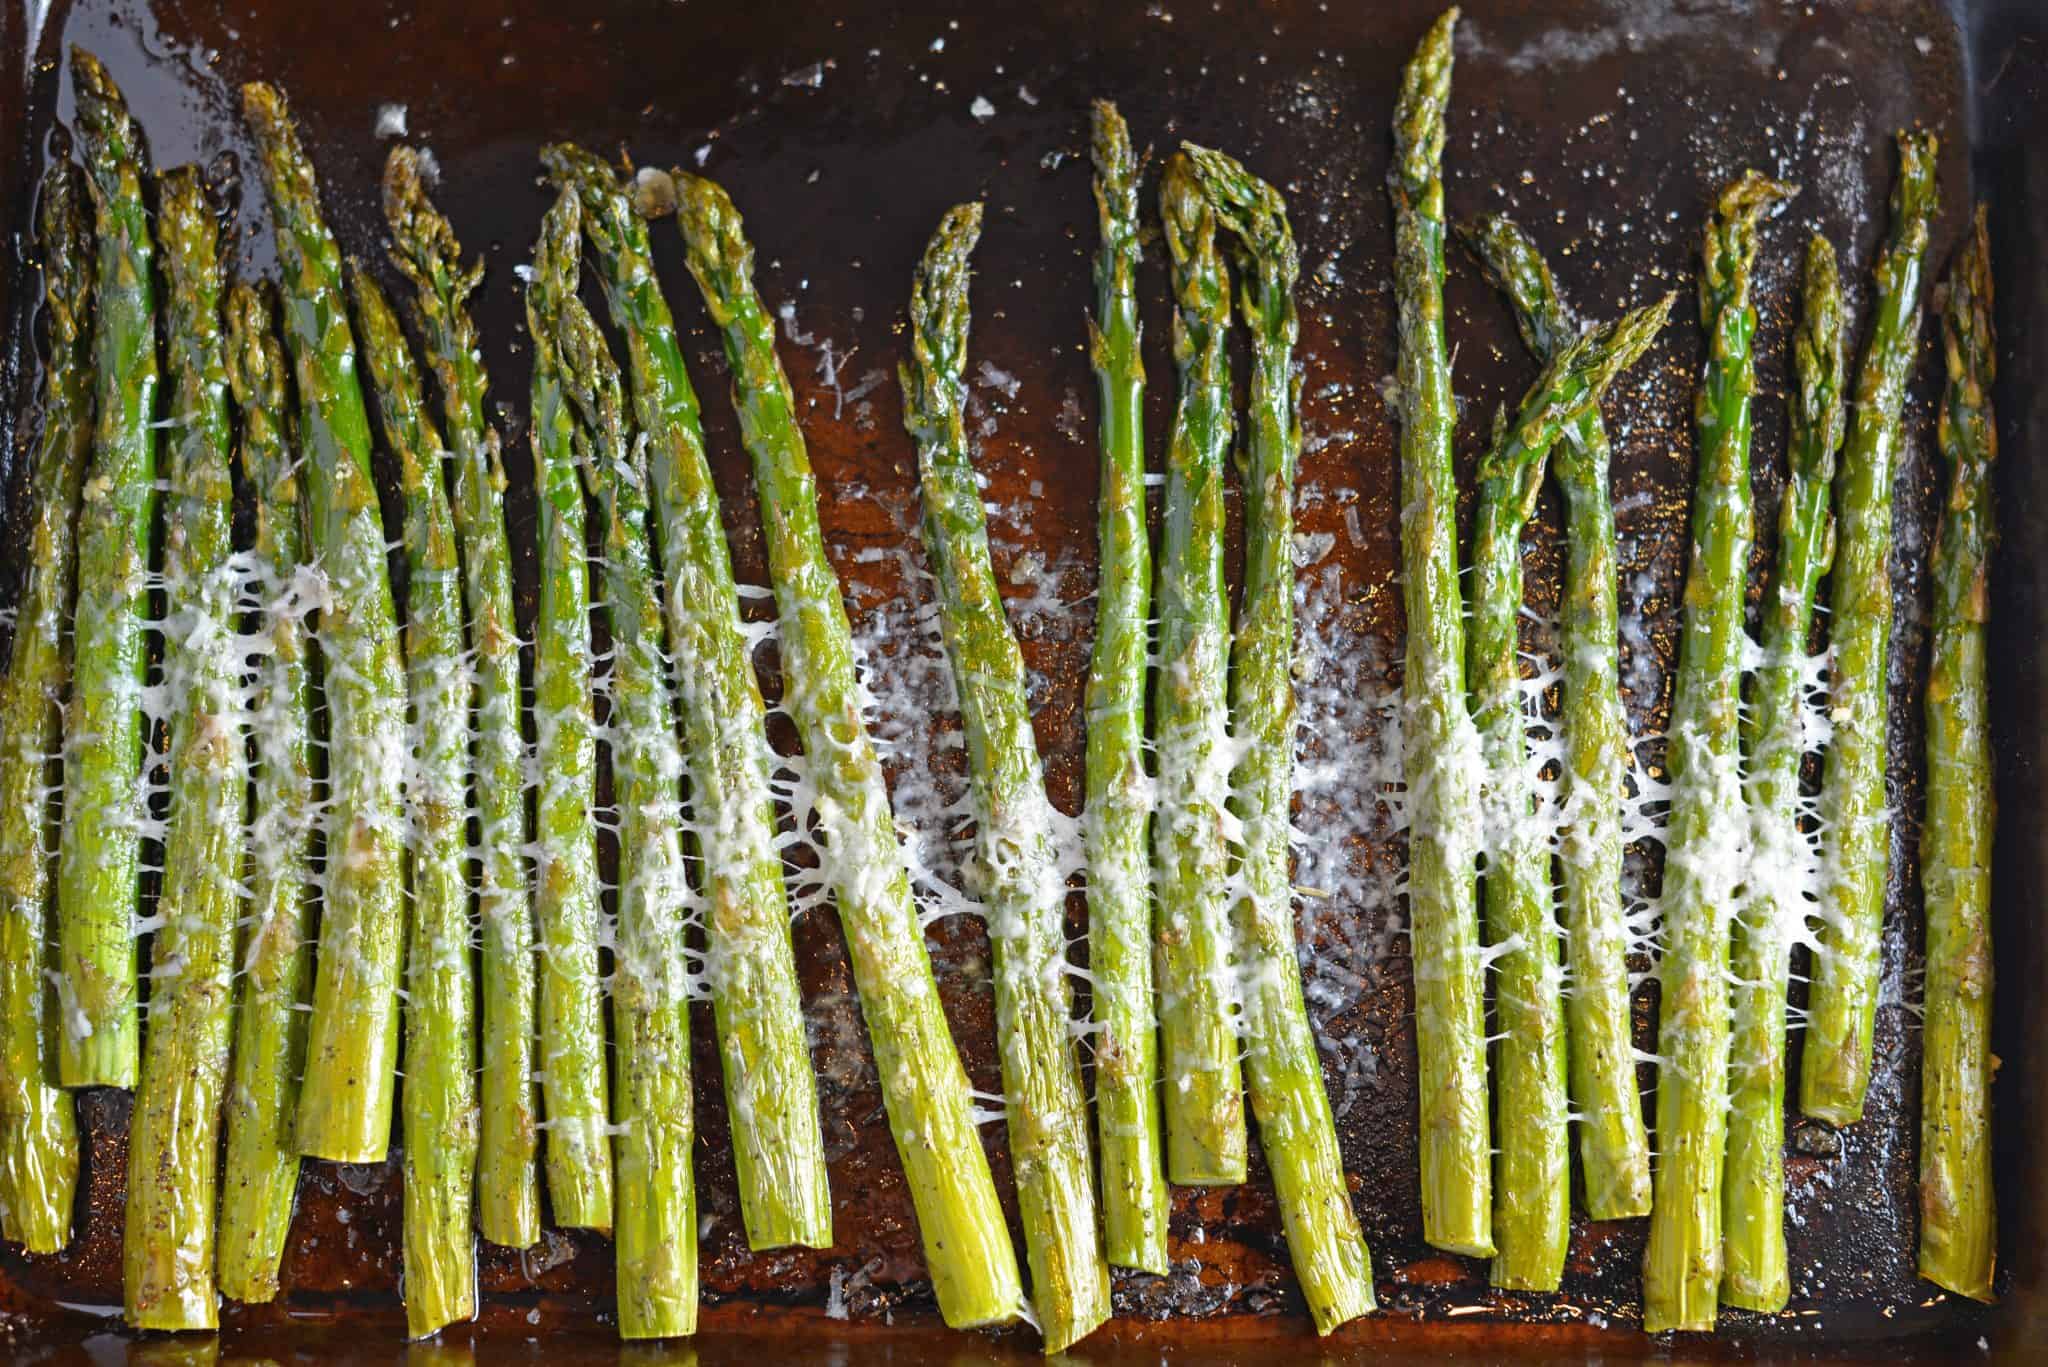 This delicious Asiago Asparagus is a quick and easy roasted asparagus recipe requiring only 4 ingredients and 15 minutes to prepare. #howtomakeasparagus #roastedasparagus www.savoryexperiments.com